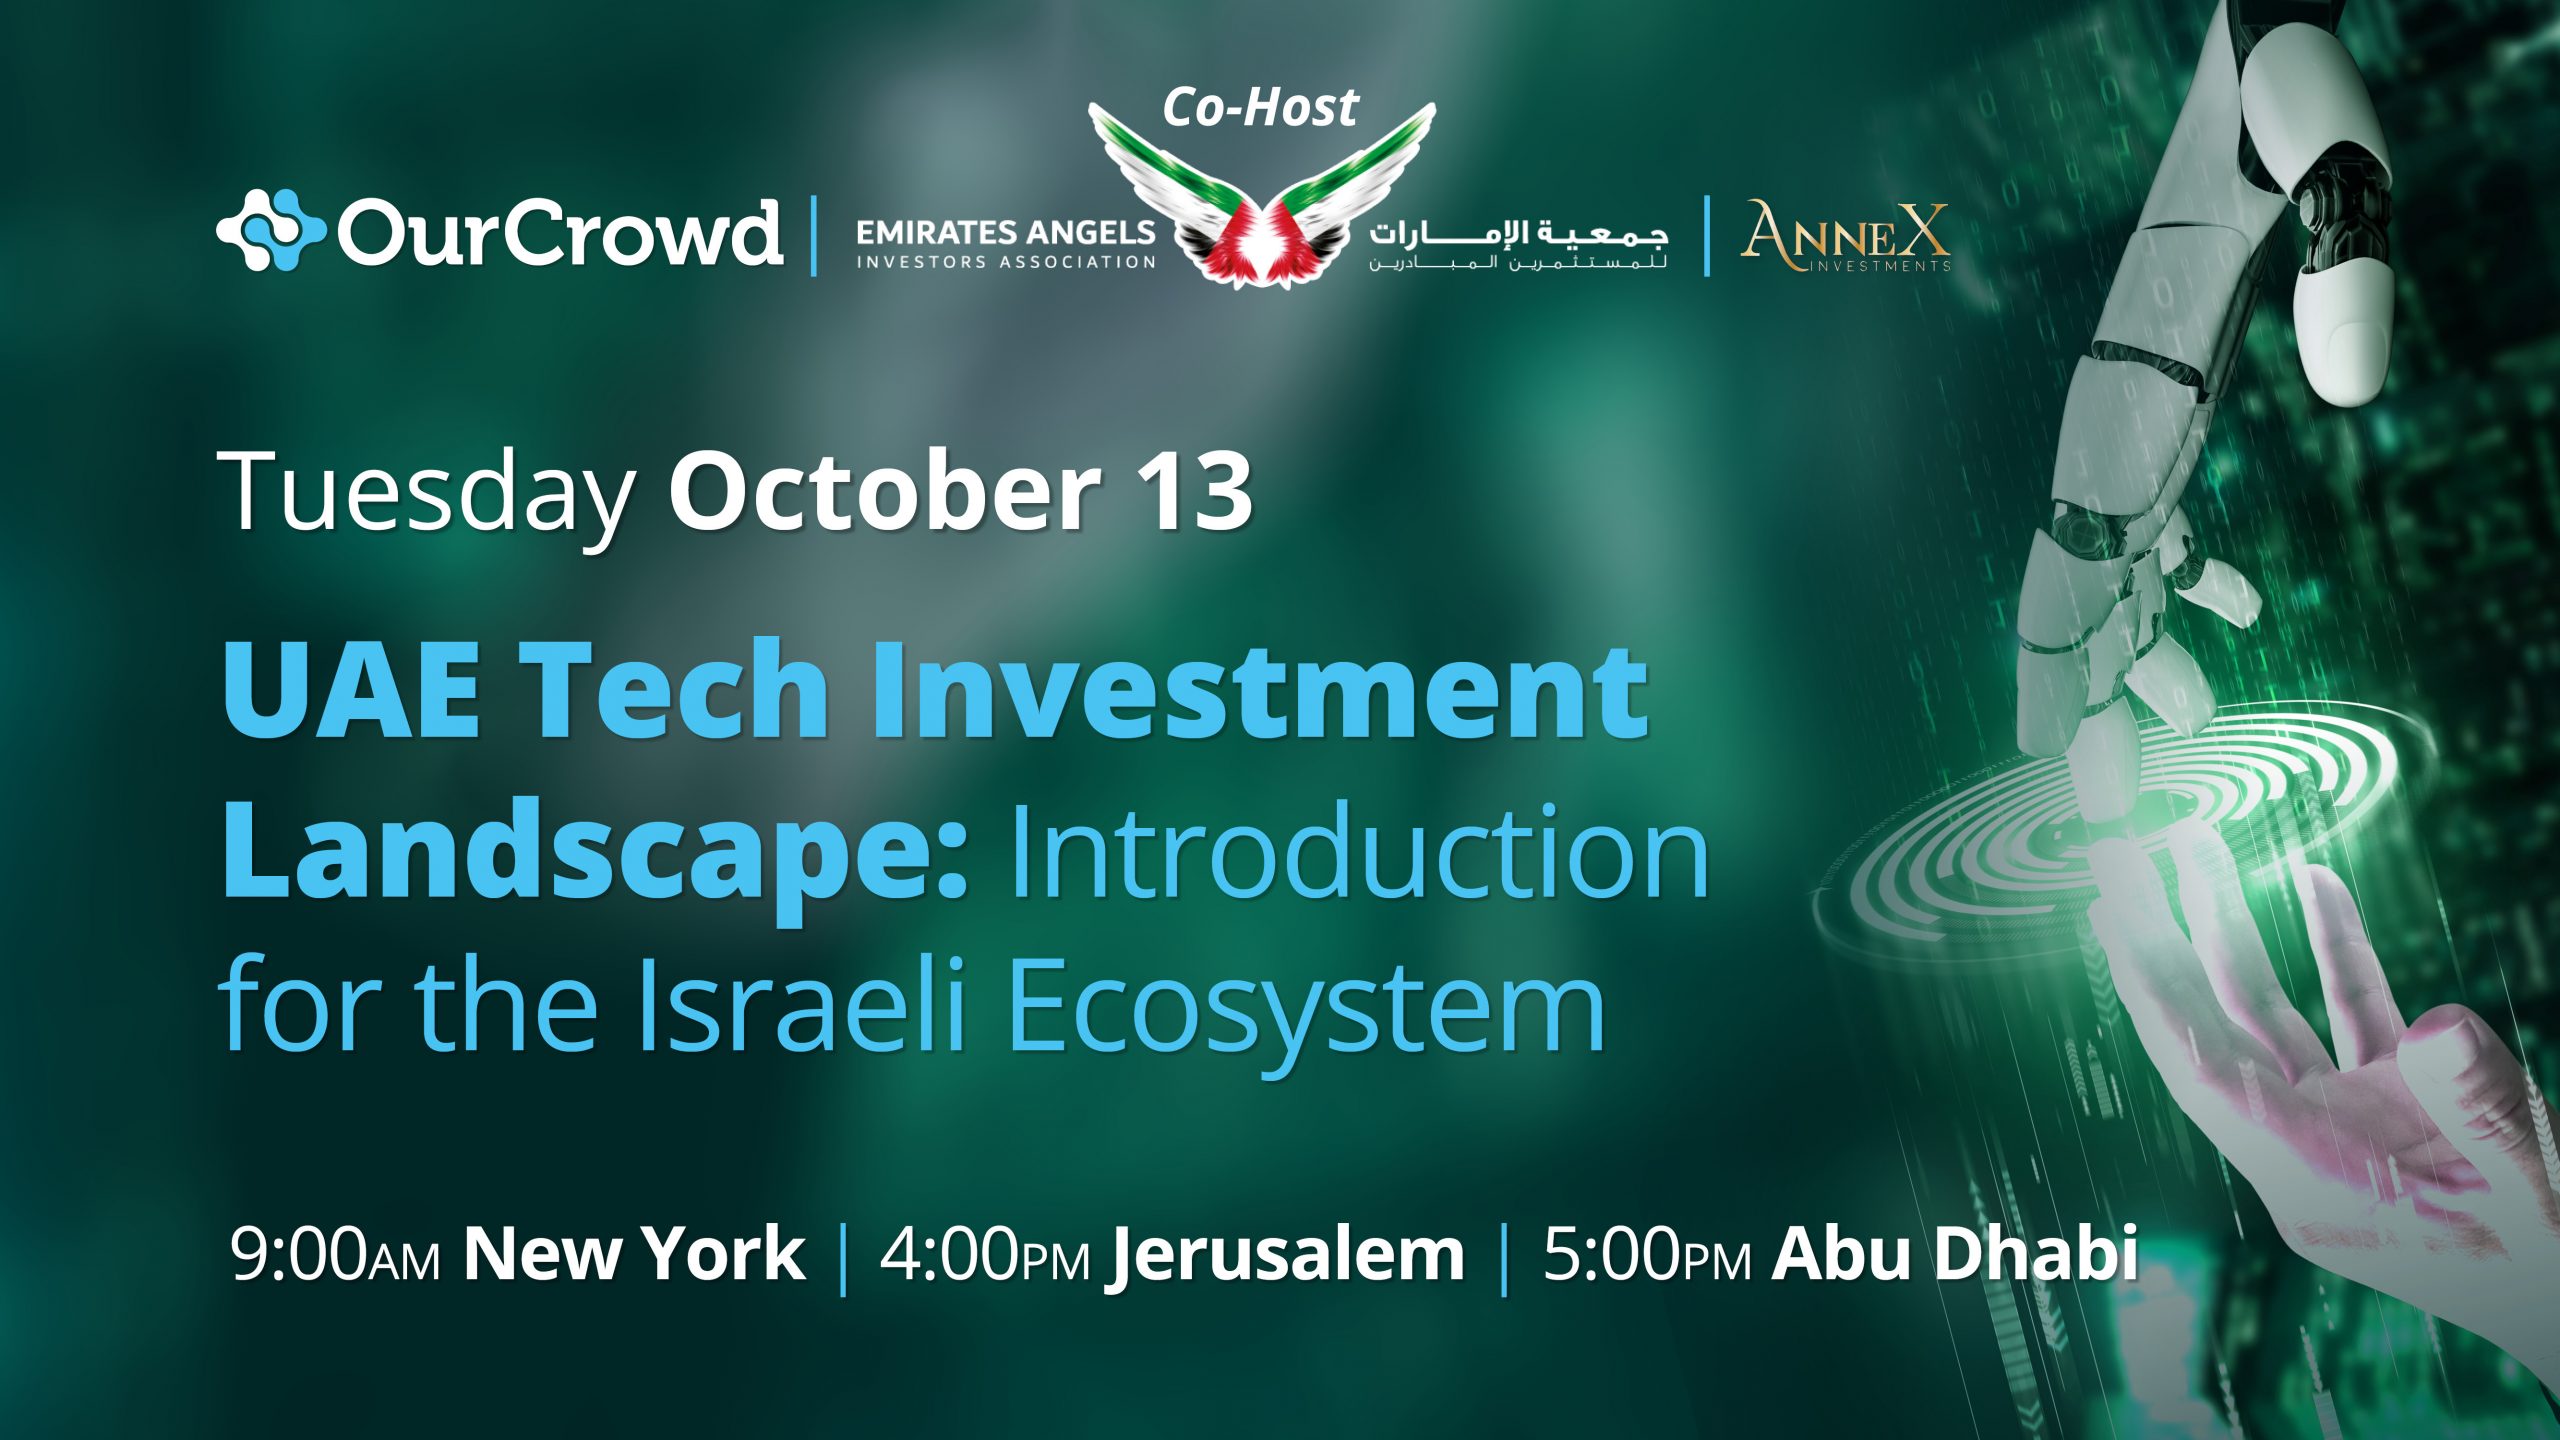 UAE Tech Investment Landscape: Introduction for the Israeli Ecosystem